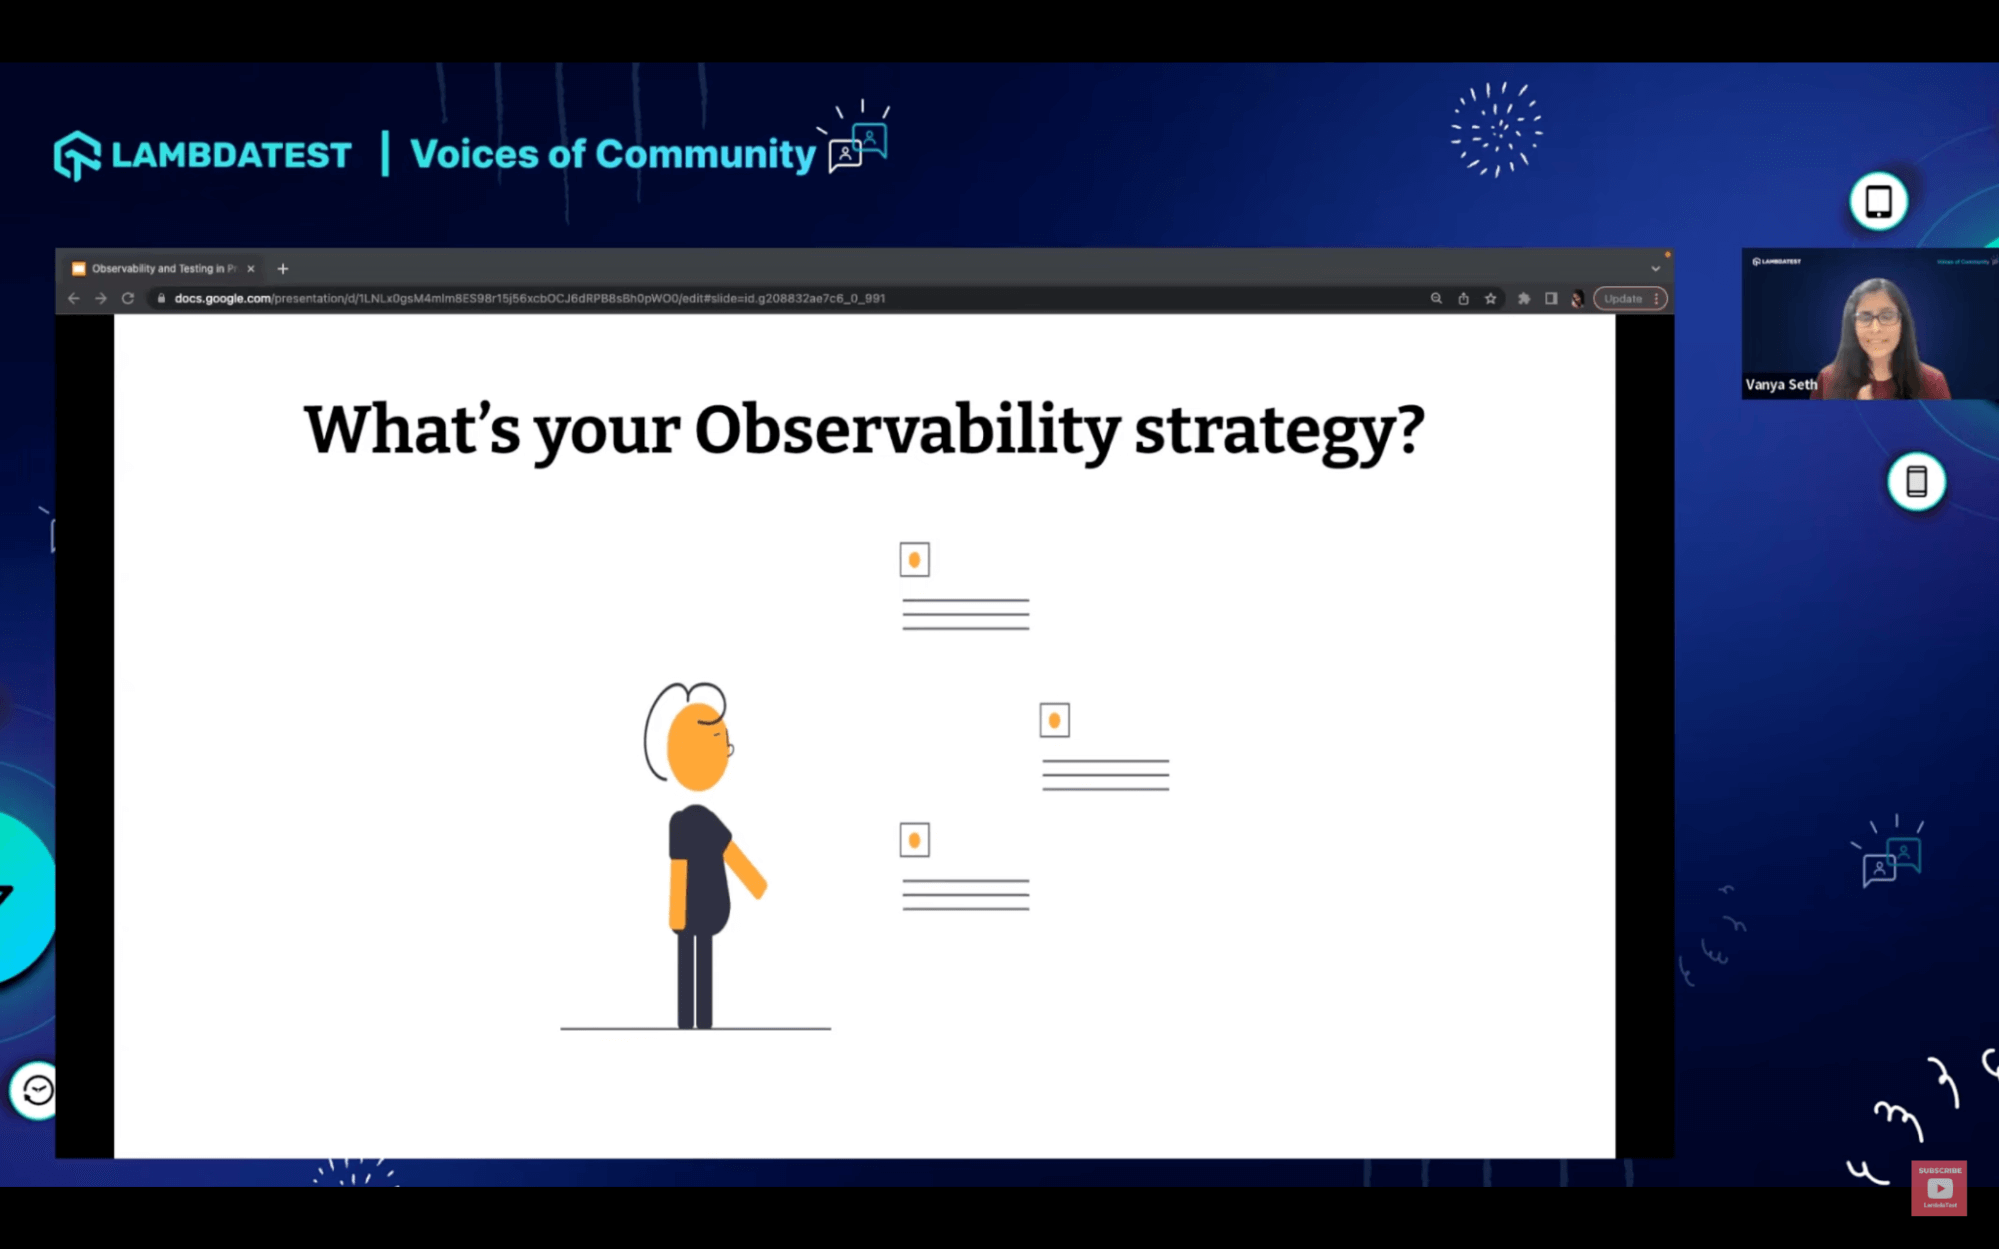 What’s your Observability Strategy